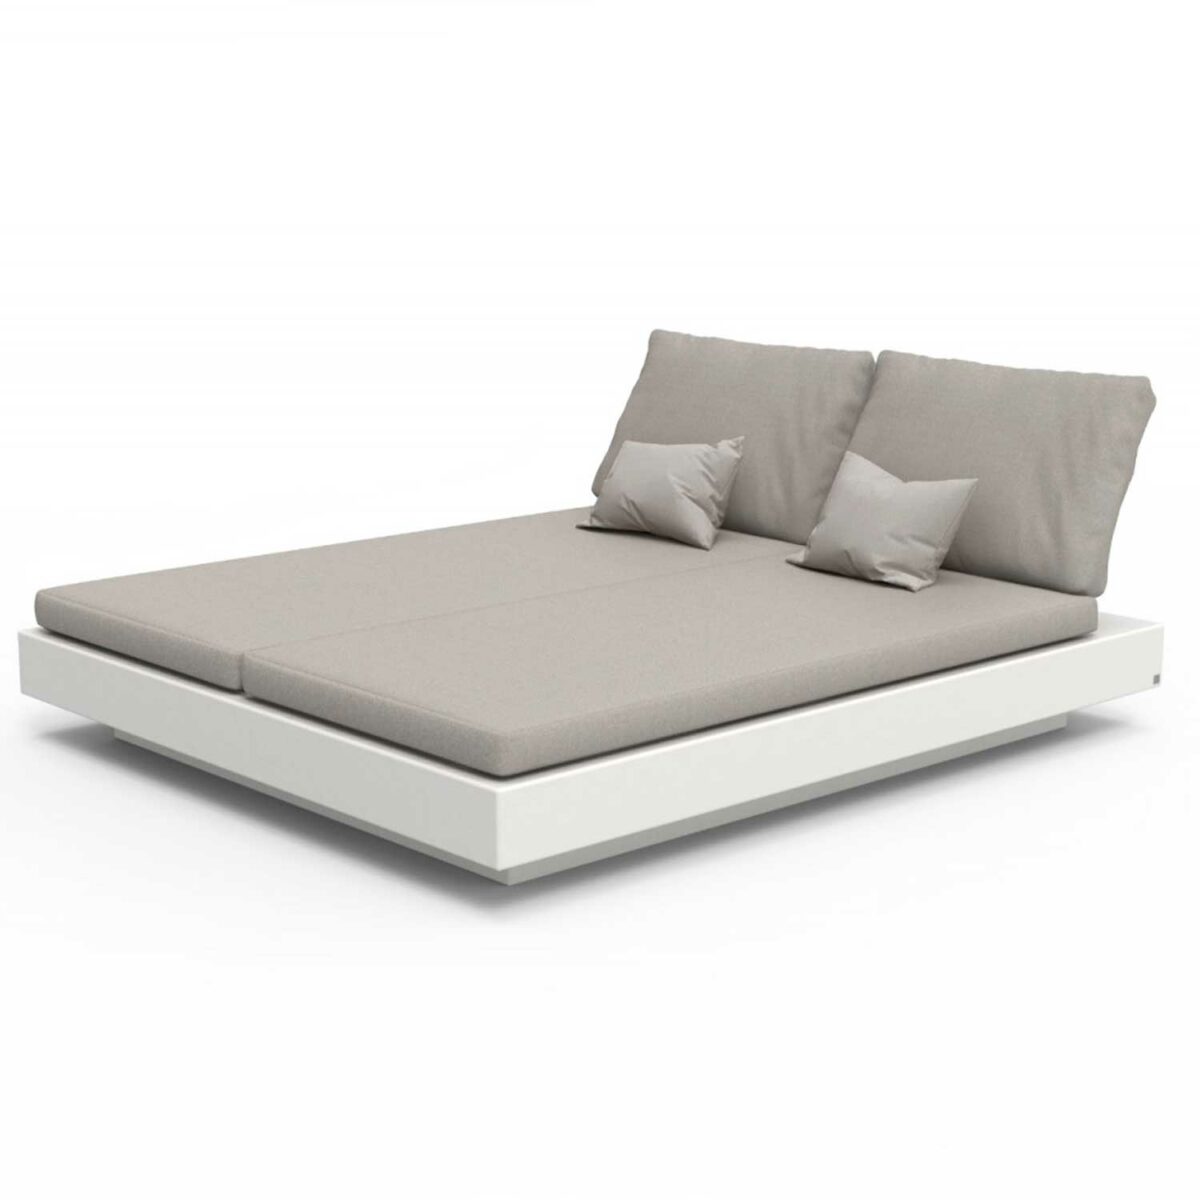 NORDIC double bed chaise longue white